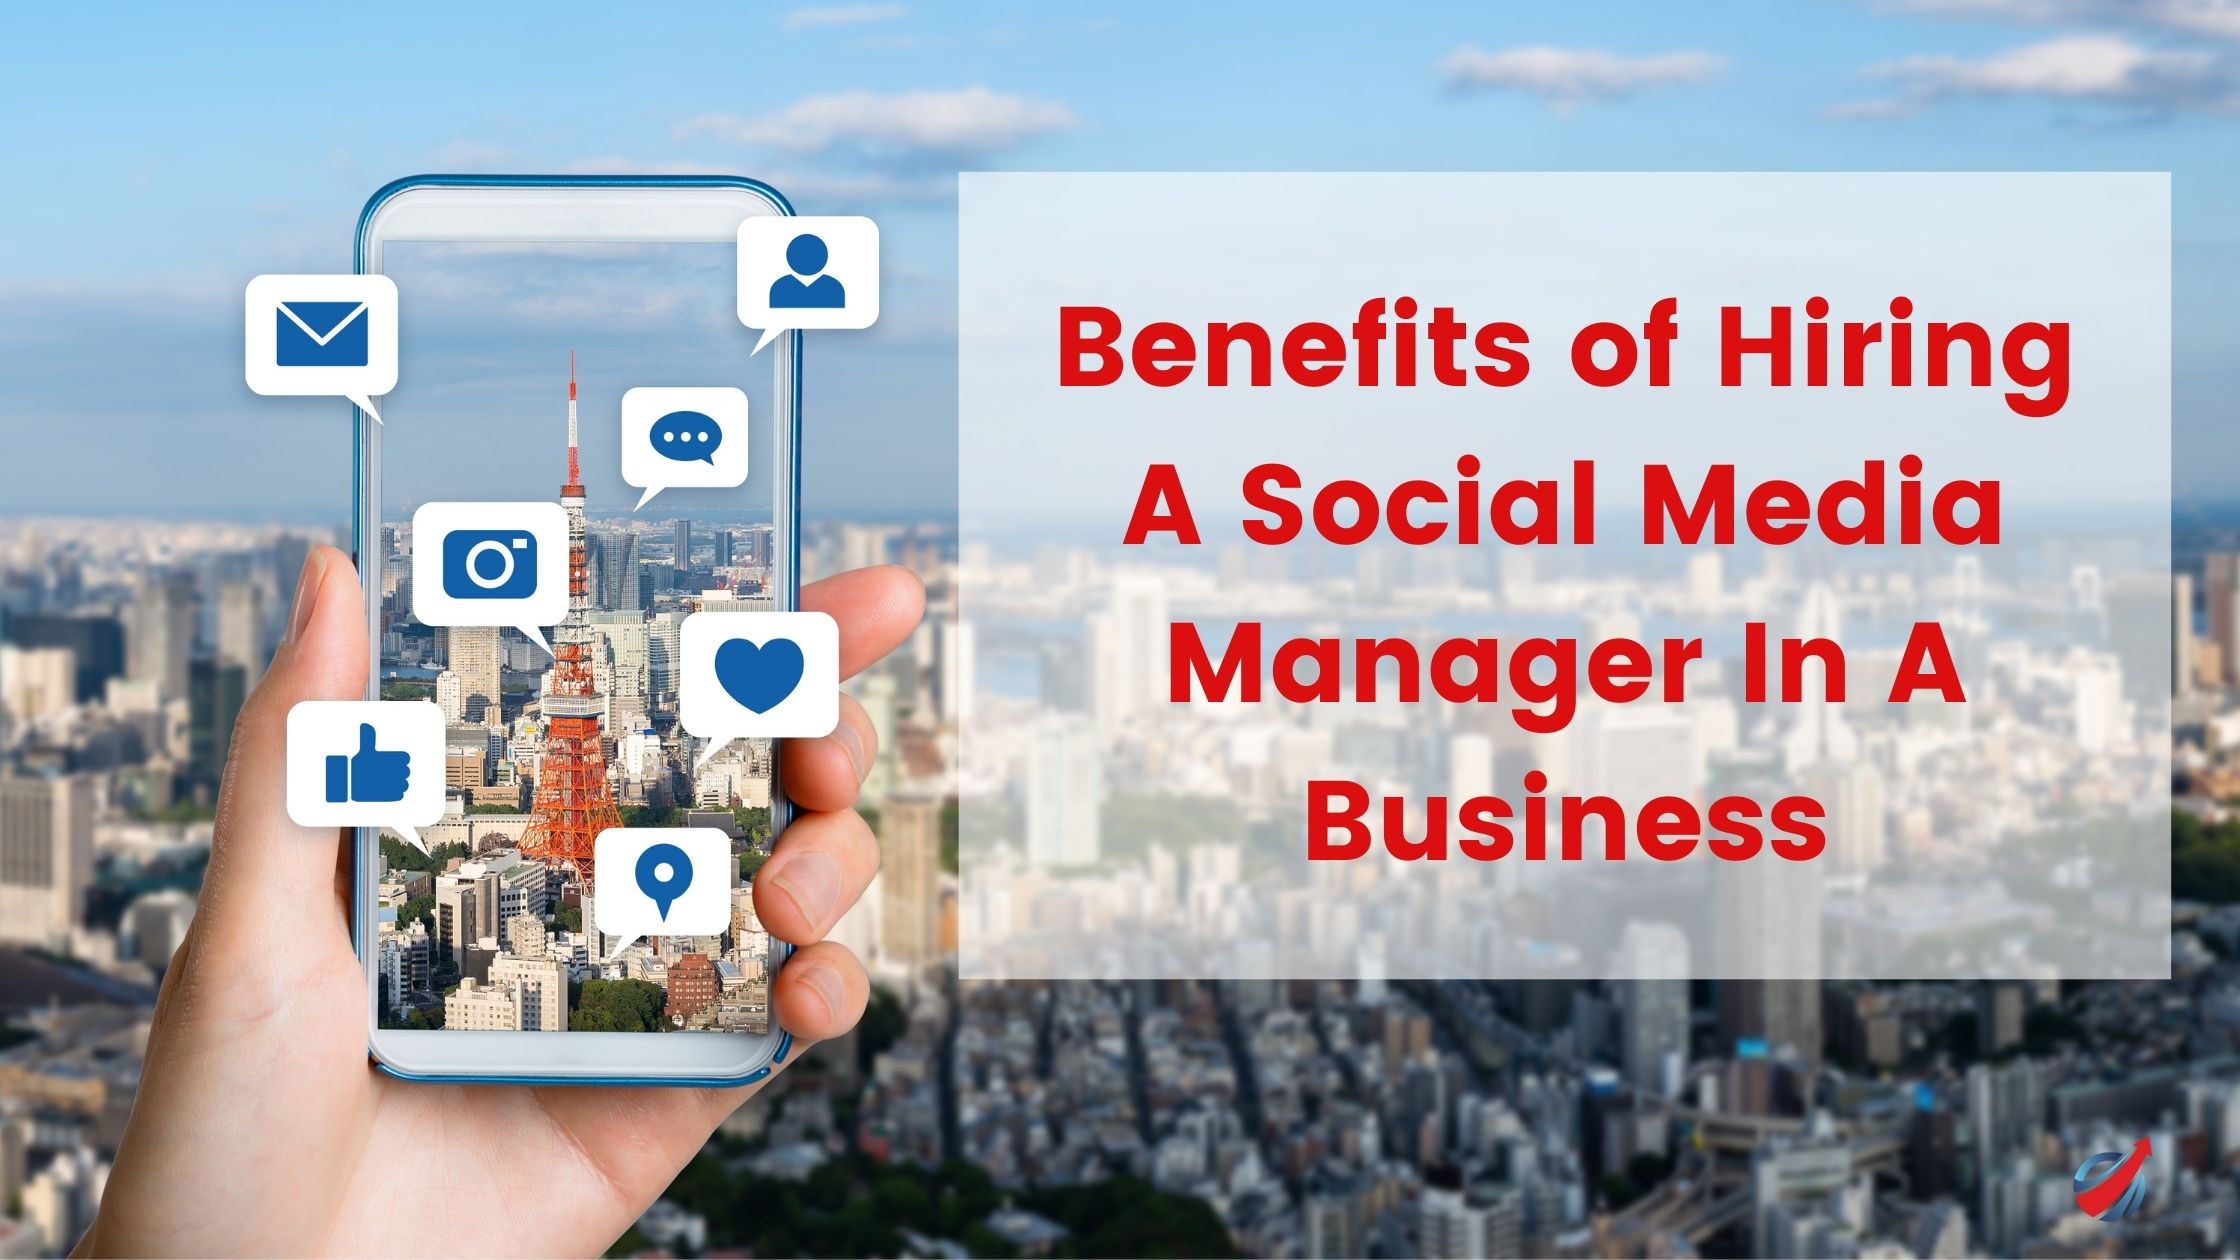 Social Media Manager In A Business